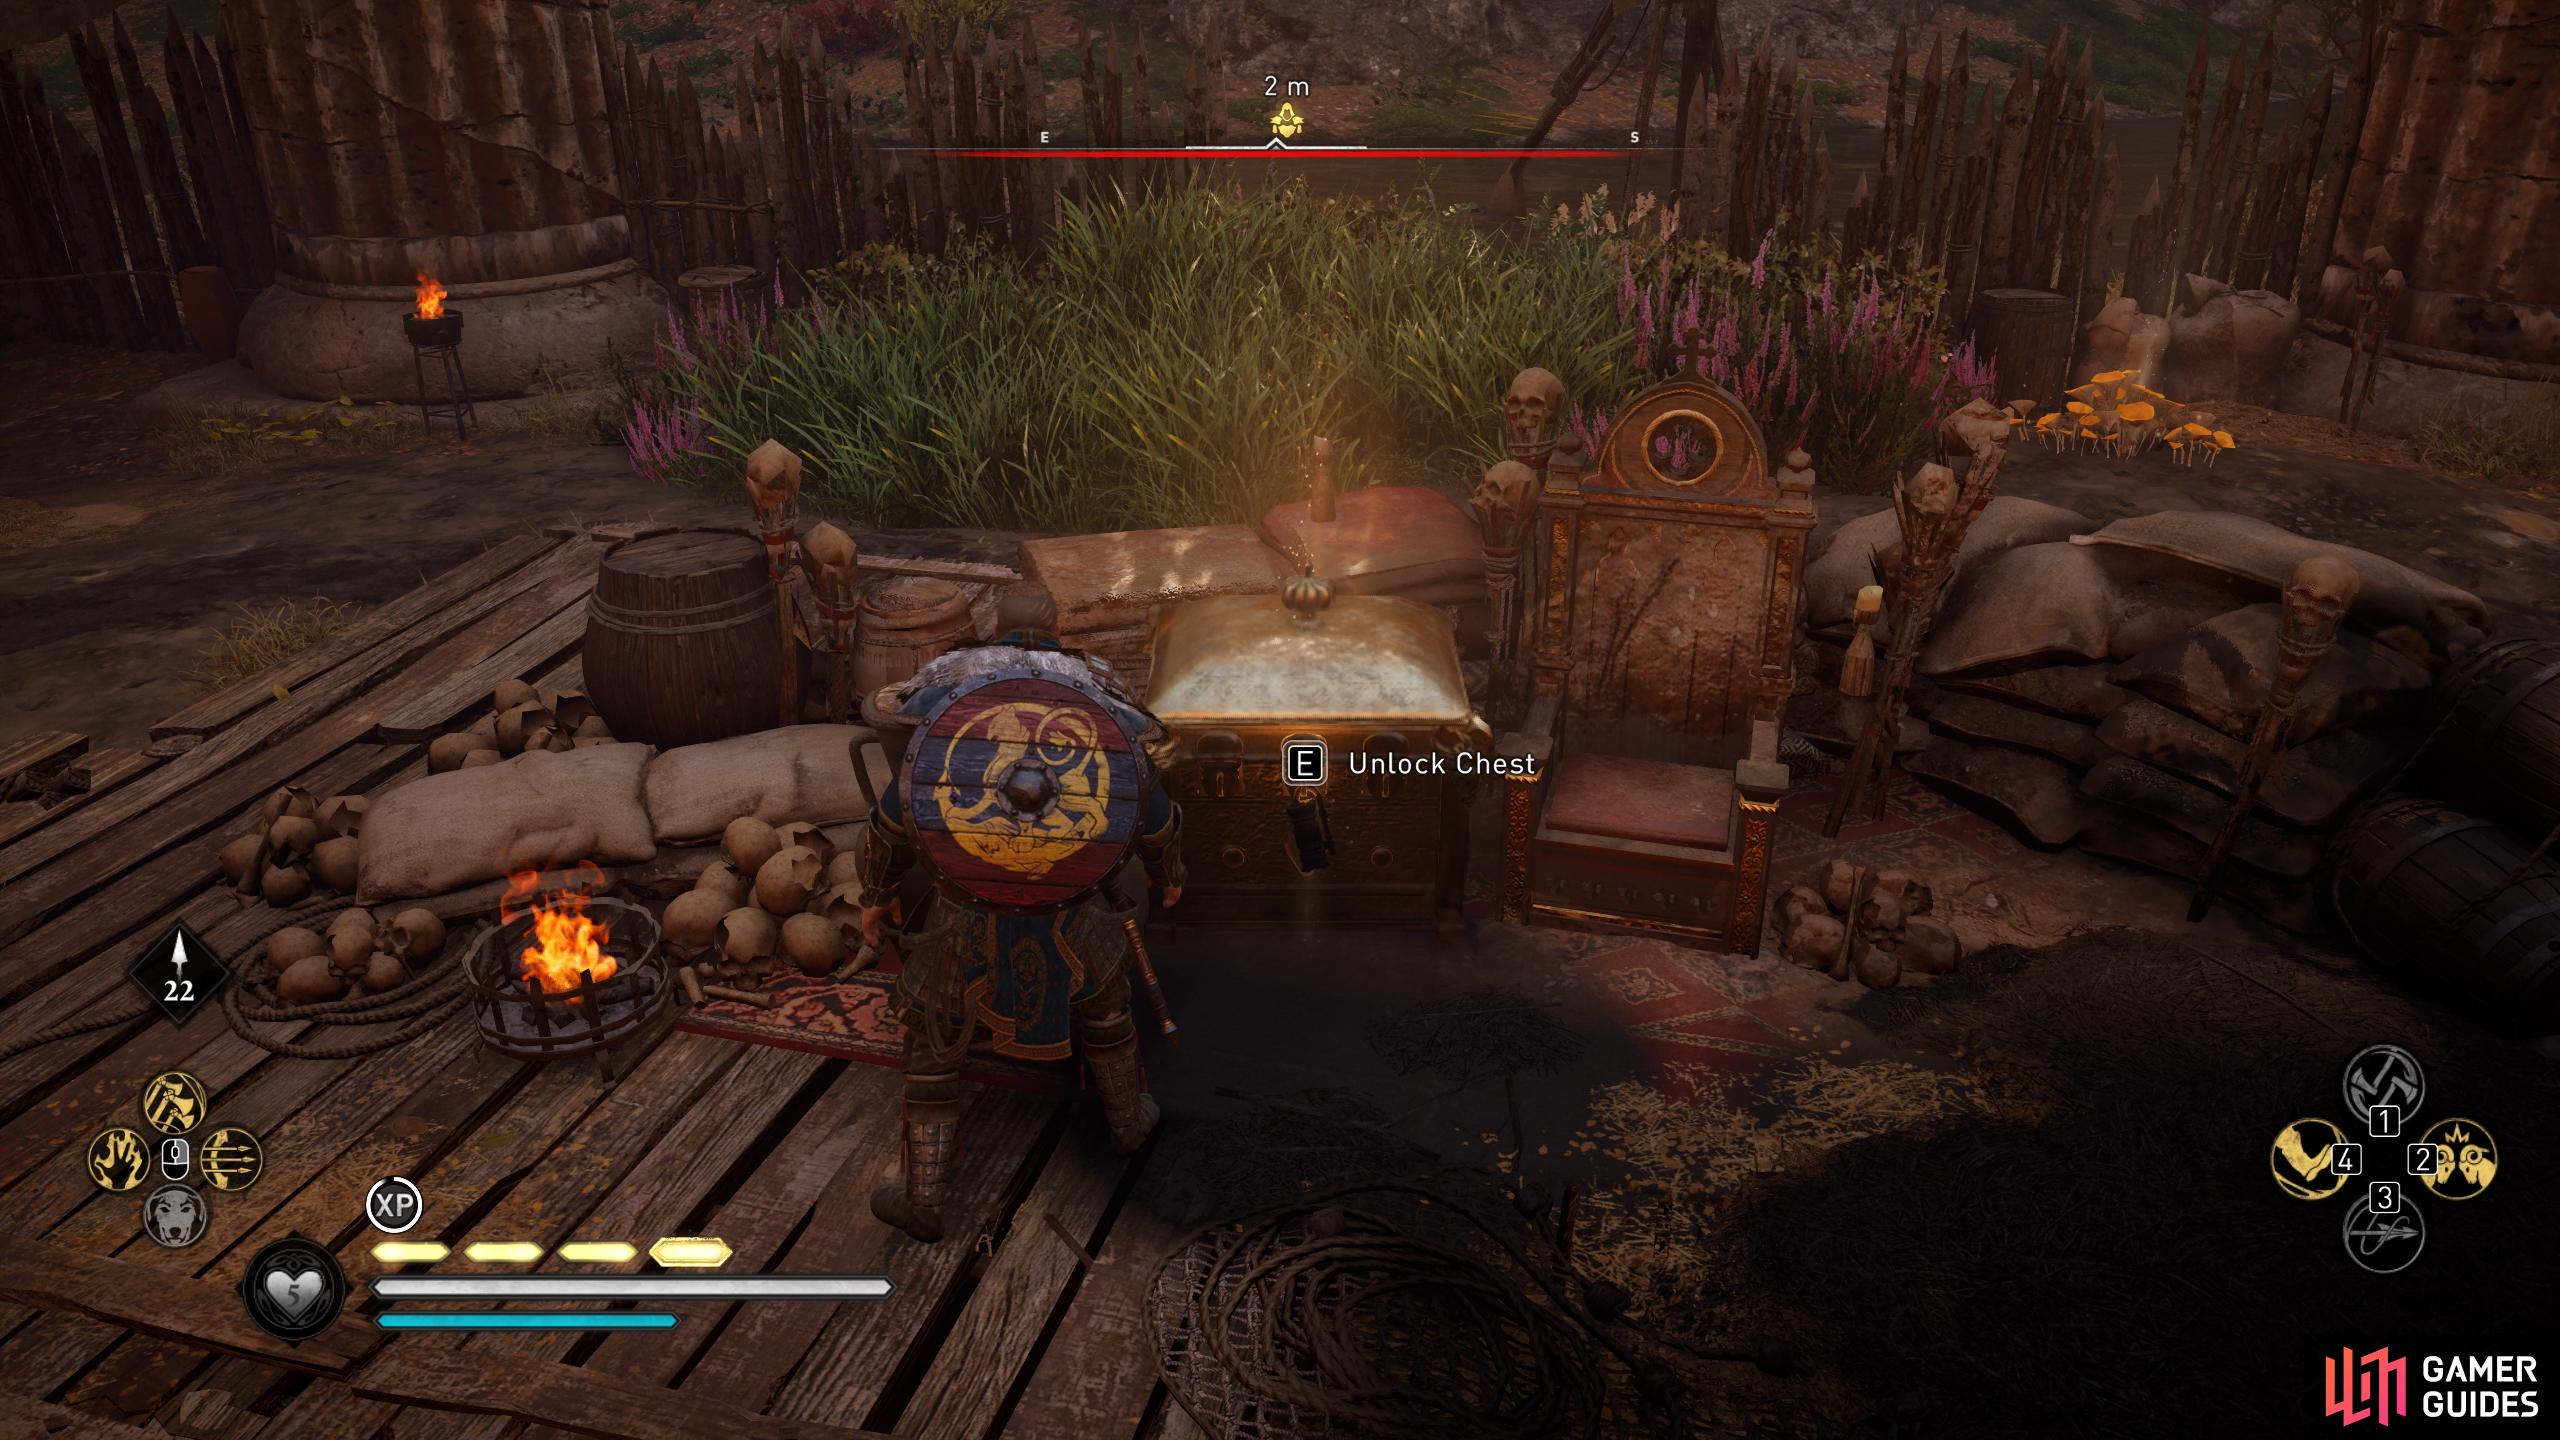 You'll find the chest near Lucian's throne in the bandit camp.